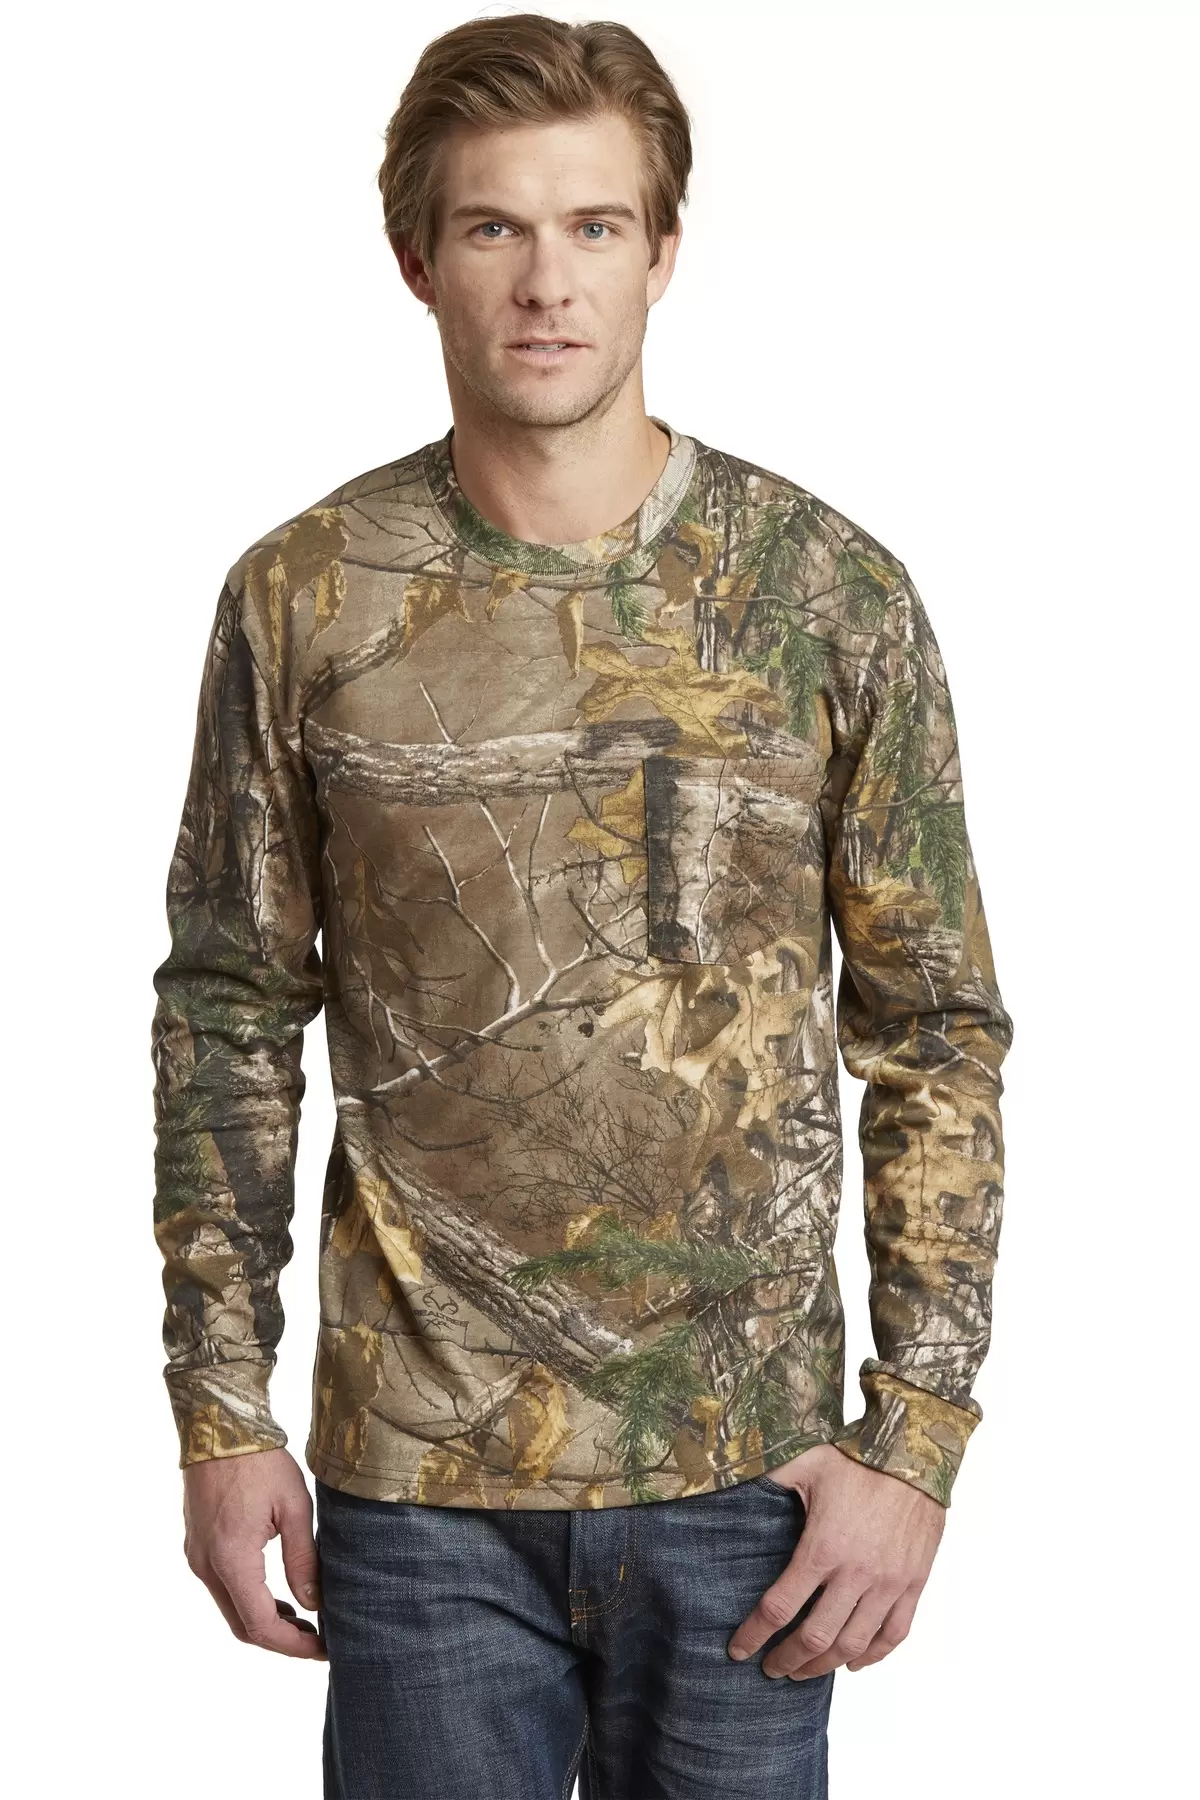 Russell Outdoors Realtree Long Sleeve Explorer 100% Cotton T-Shirt with Pocket - S020R - Realtree Xtra, L